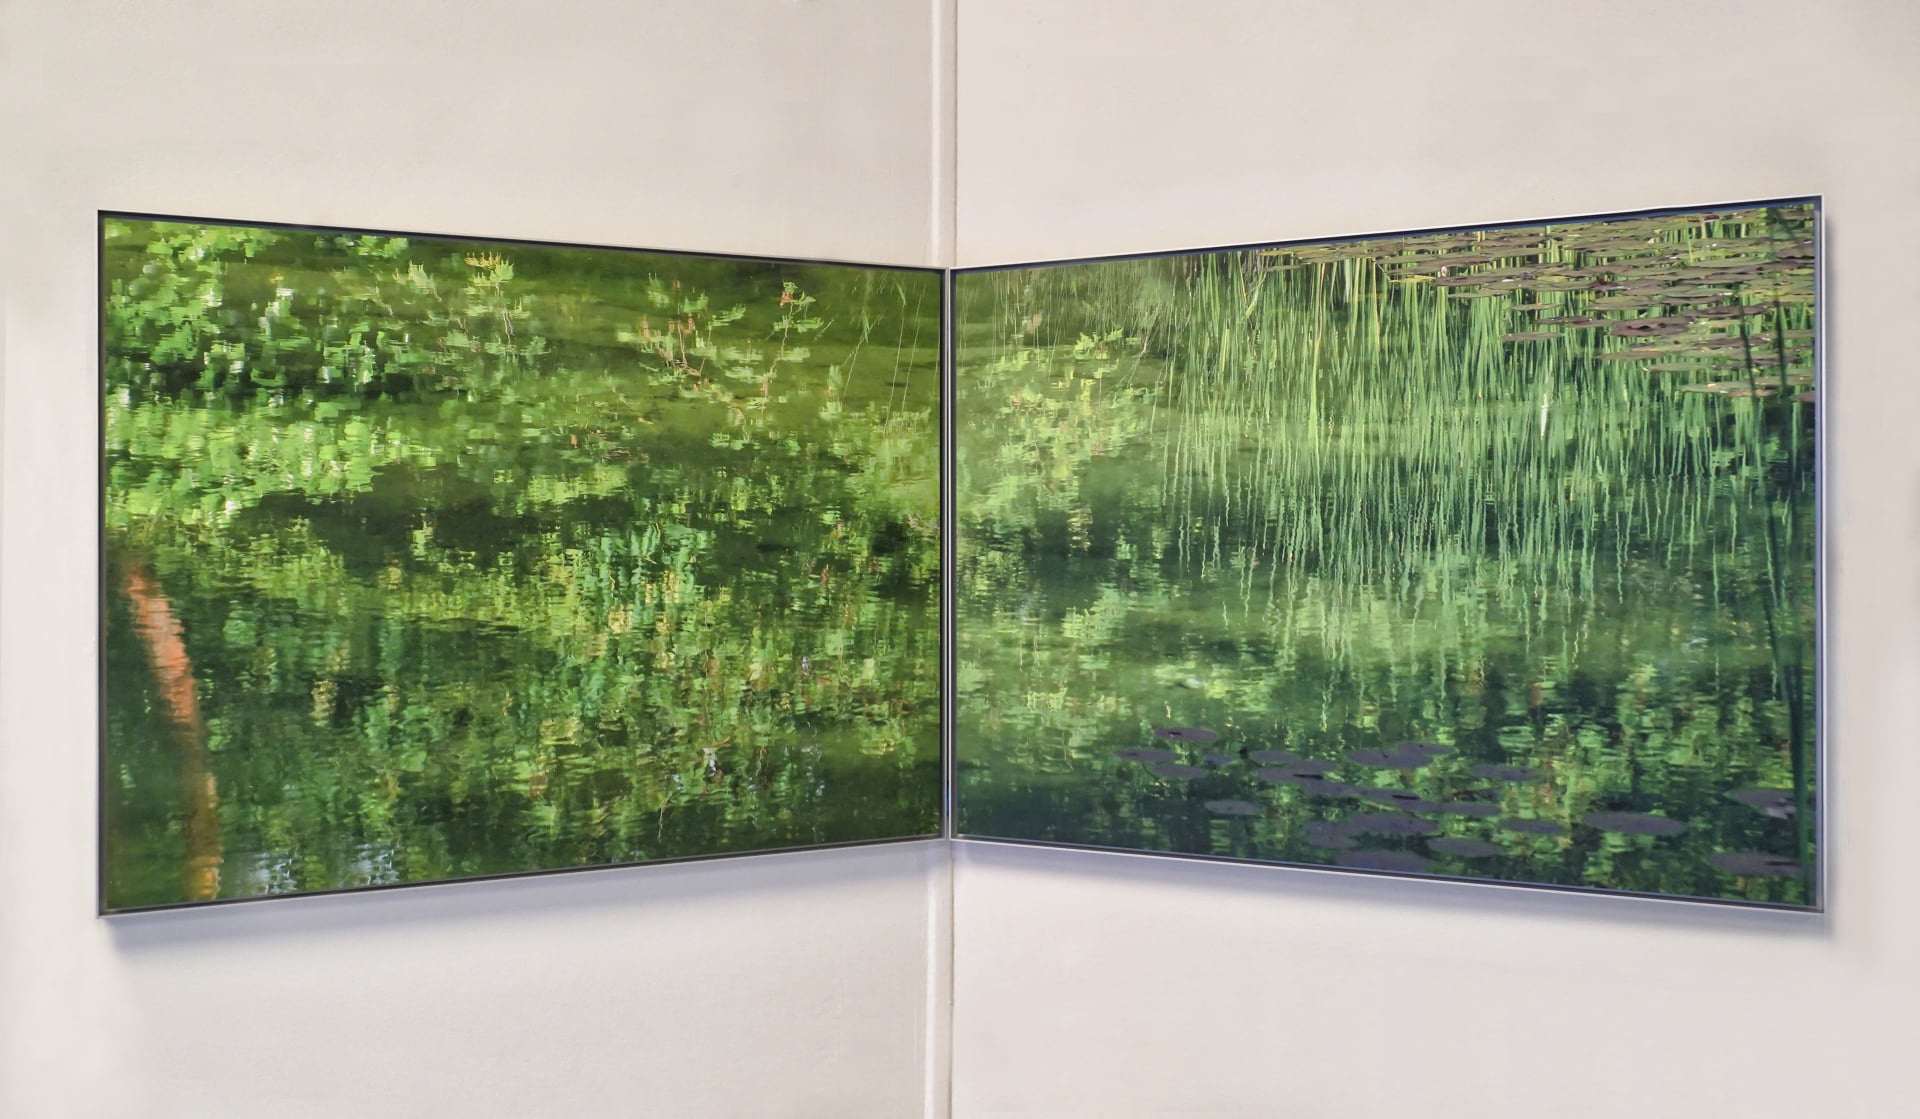 8-Exhibit-view-featuring-diptych-taken-at-Beyeler-Foundation-garden-by-Paul-Clemence-instalaltion-shot-by-Harold-Estime-courtesy-of-Miami-Beach-Botanical-Garden